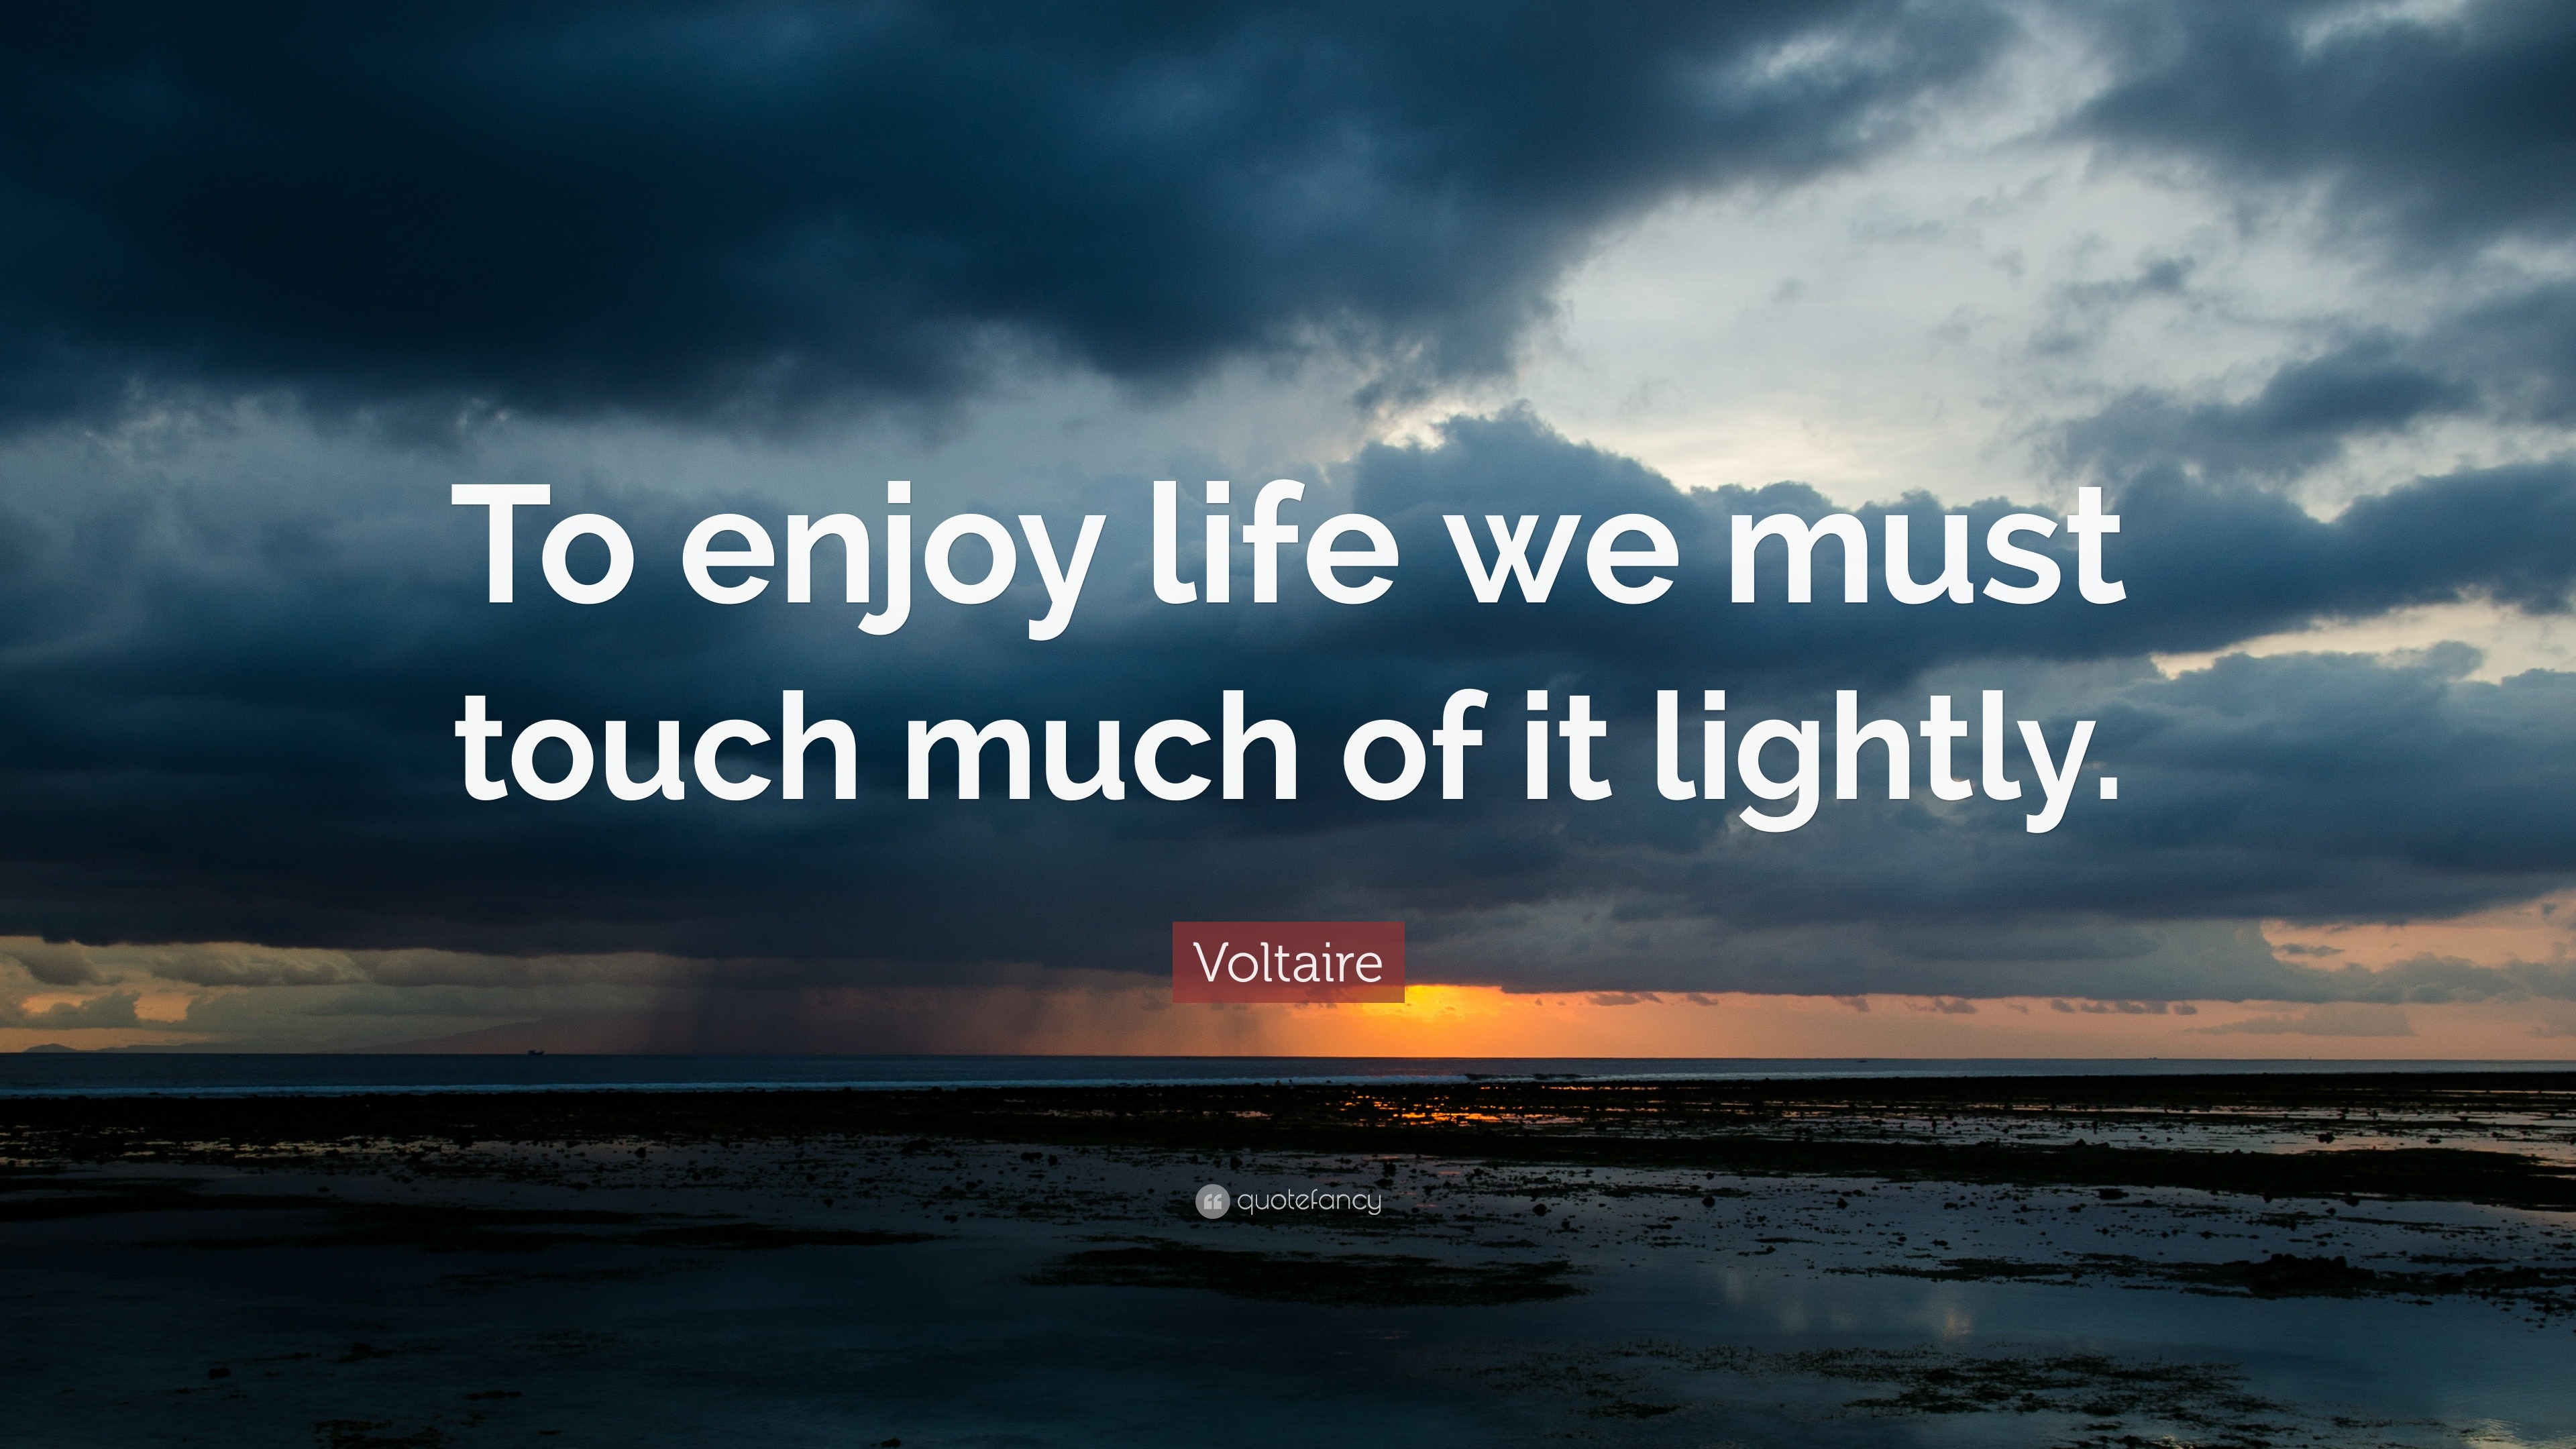 Voltaire Quote “To enjoy life we must touch much of it lightly ”